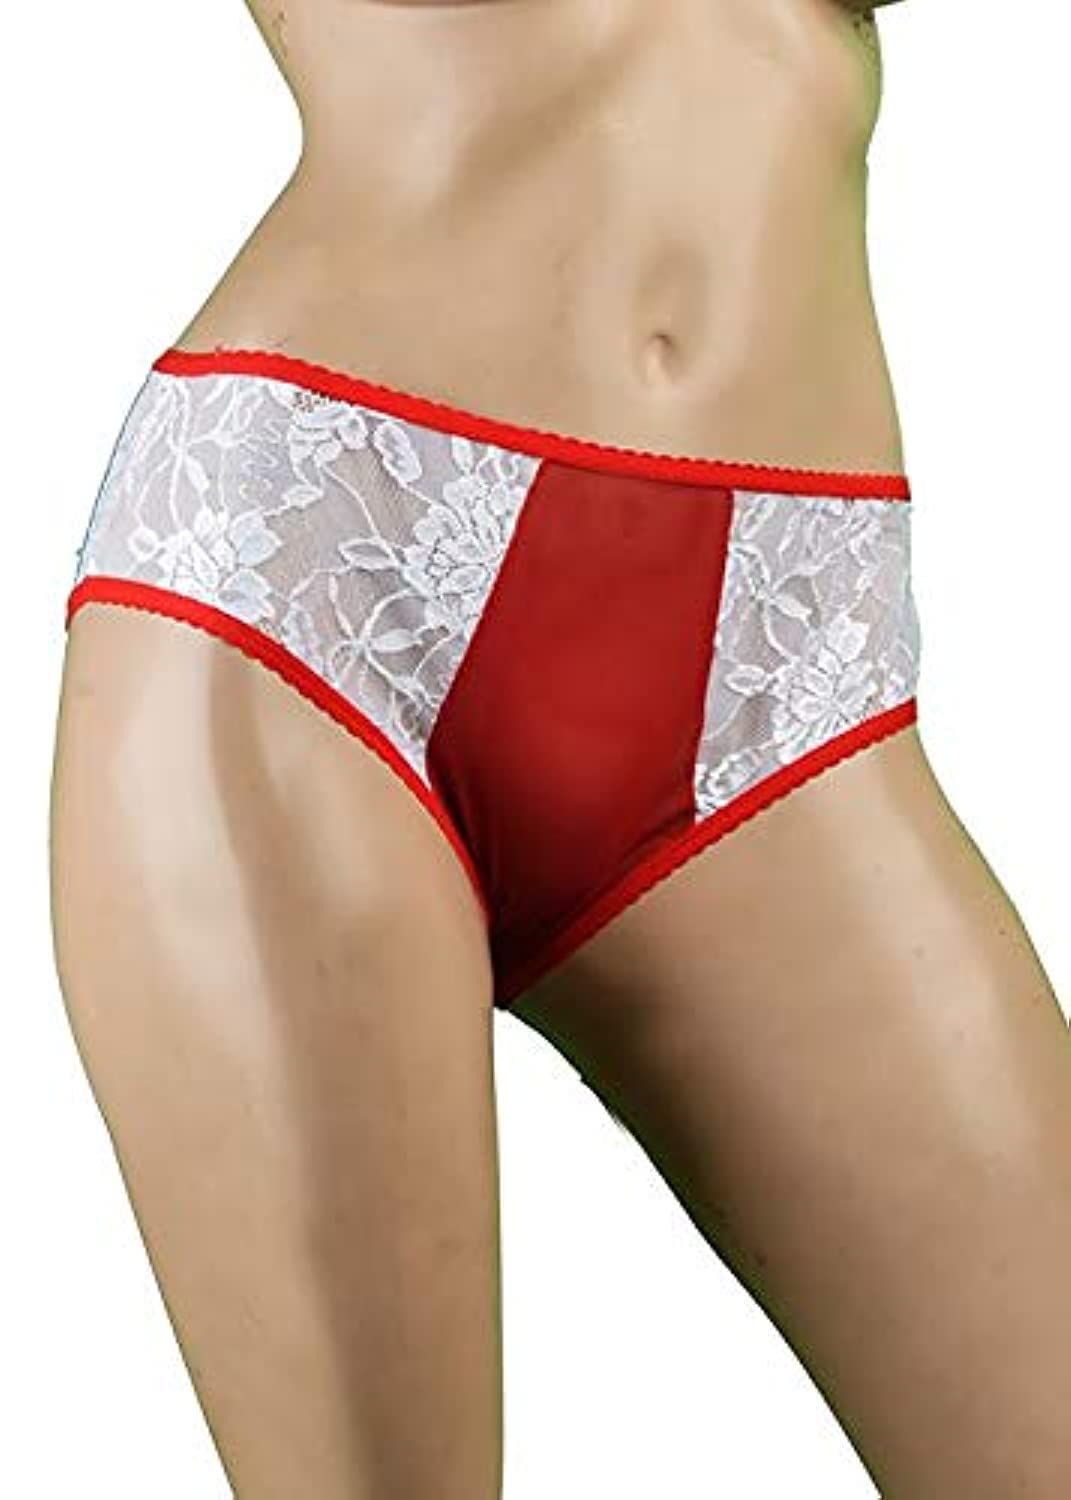 lingerie pantie red and white one size lycra Color Multi Color Size One Size